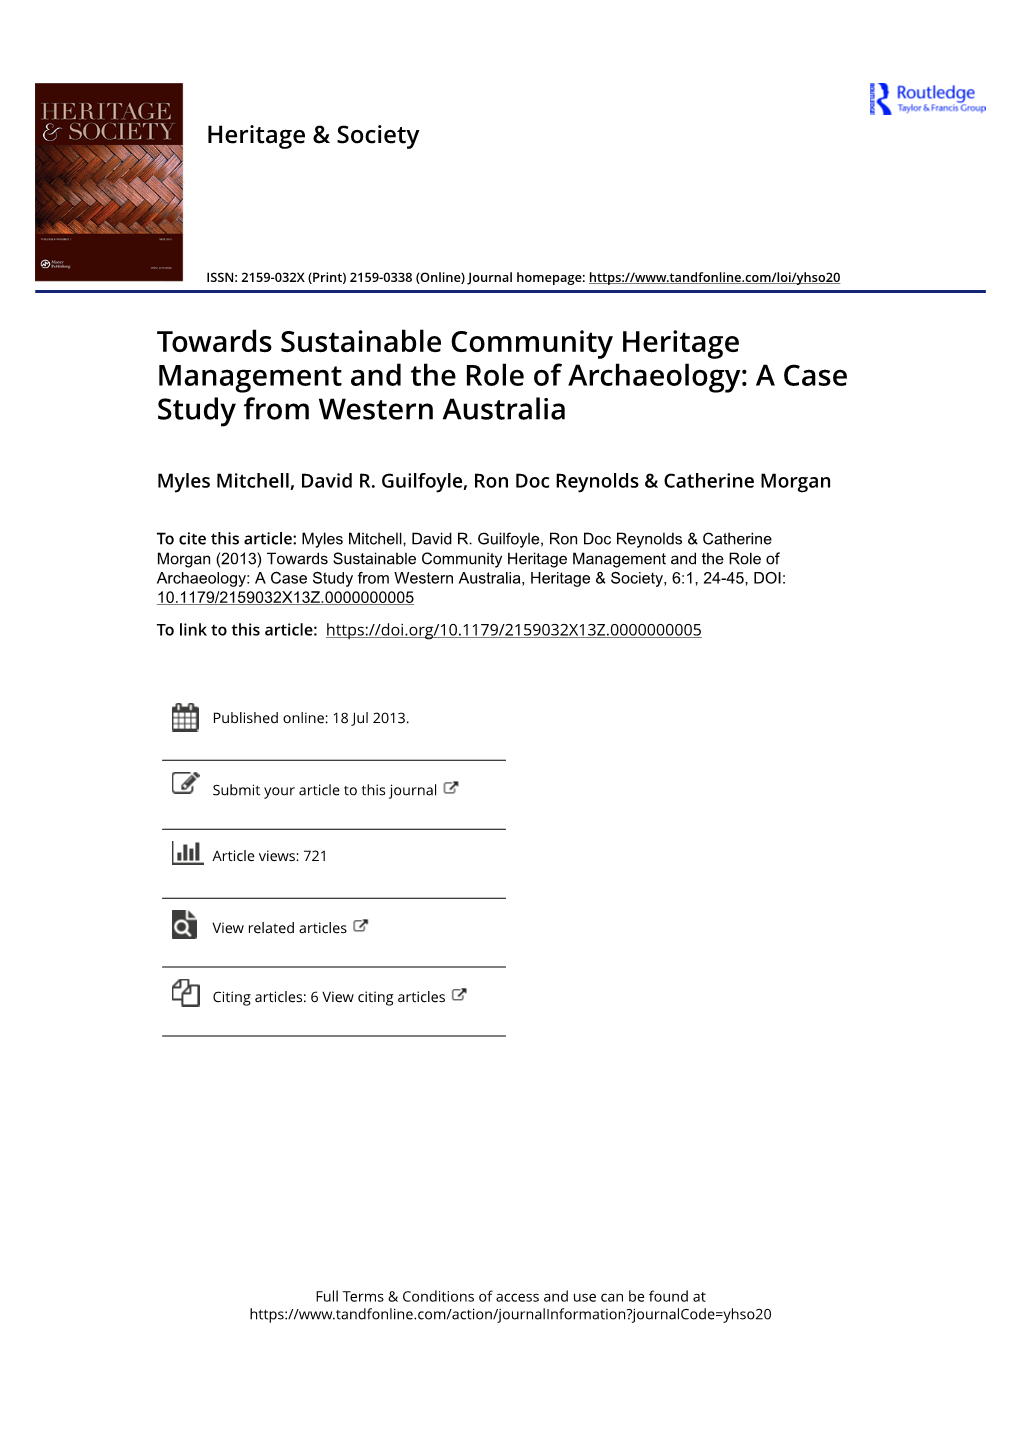 Towards Sustainable Community Heritage Management and the Role of Archaeology: a Case Study from Western Australia